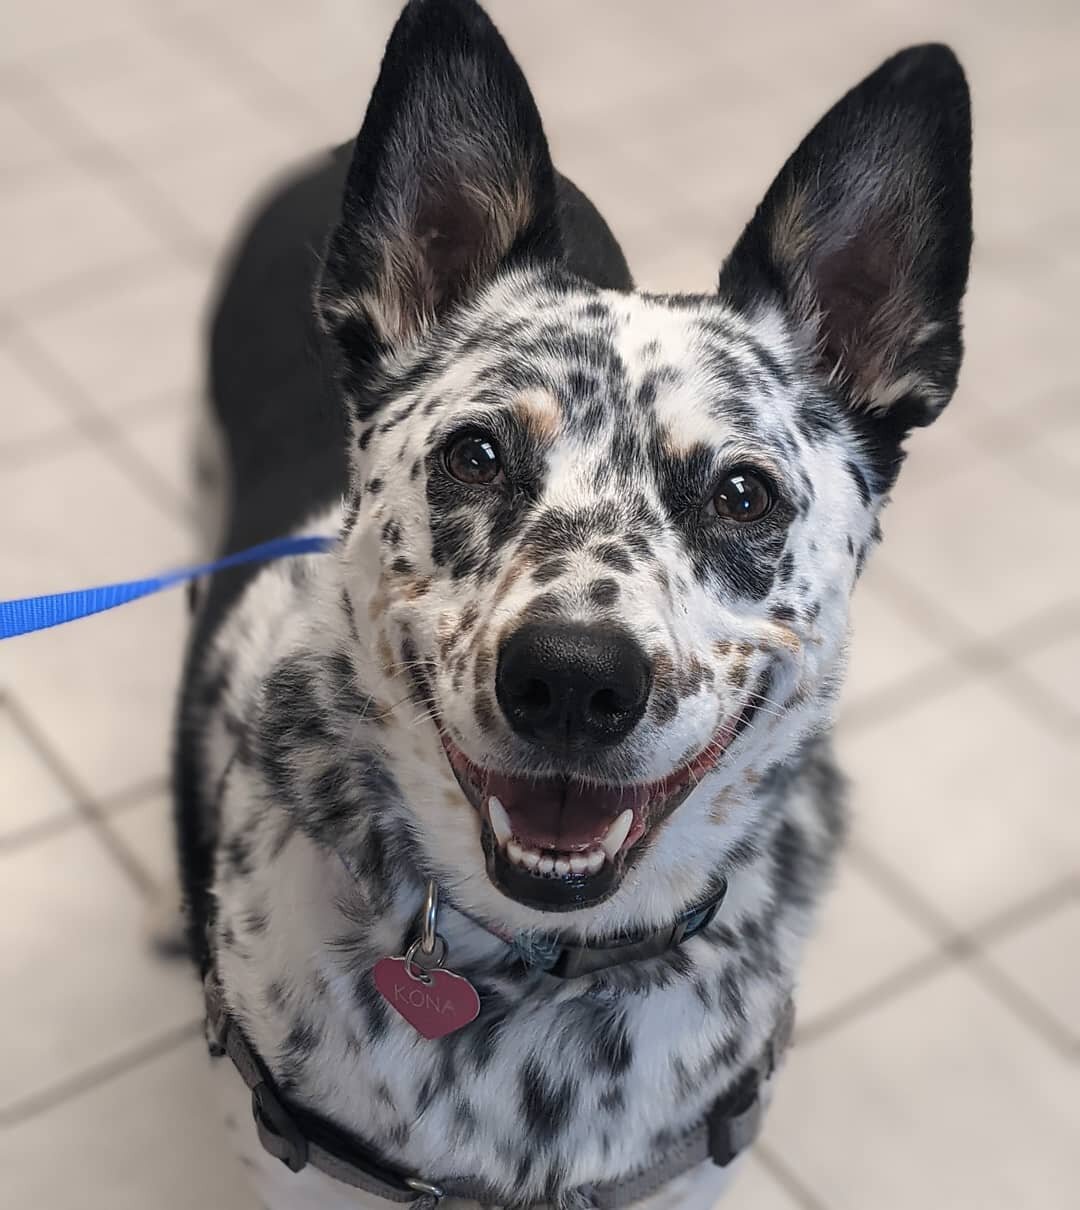 Kona was all smiles at her visit!